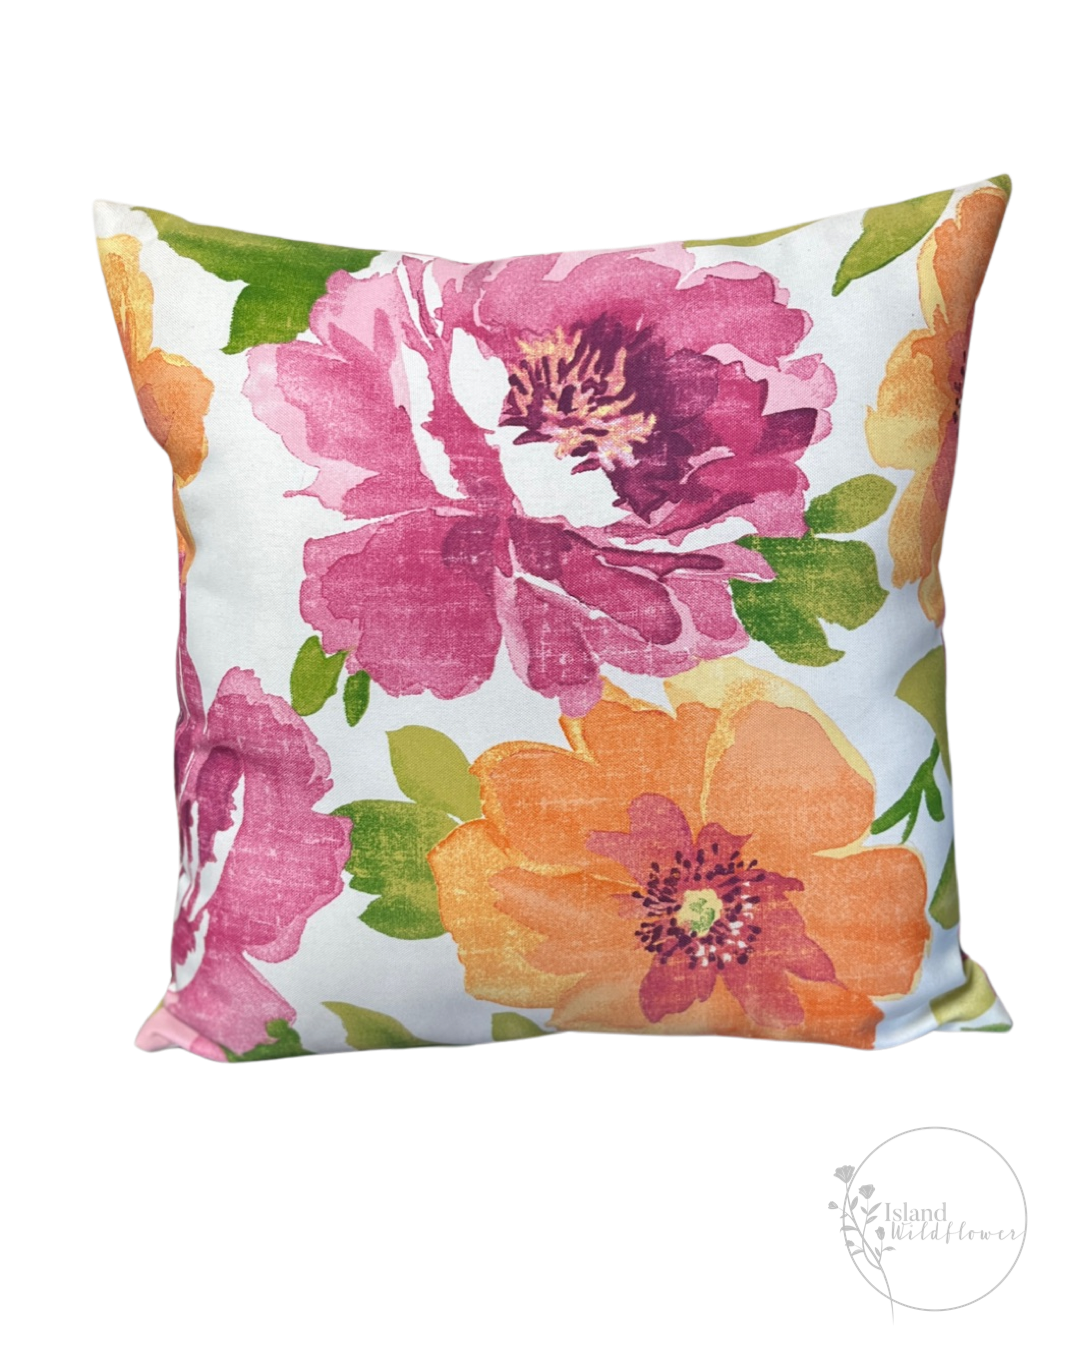 Floral Watercolor Throw Pillow - Pink and Orange Flowers on White (16"x16") - Indoor/Outdoor Accent Pillow